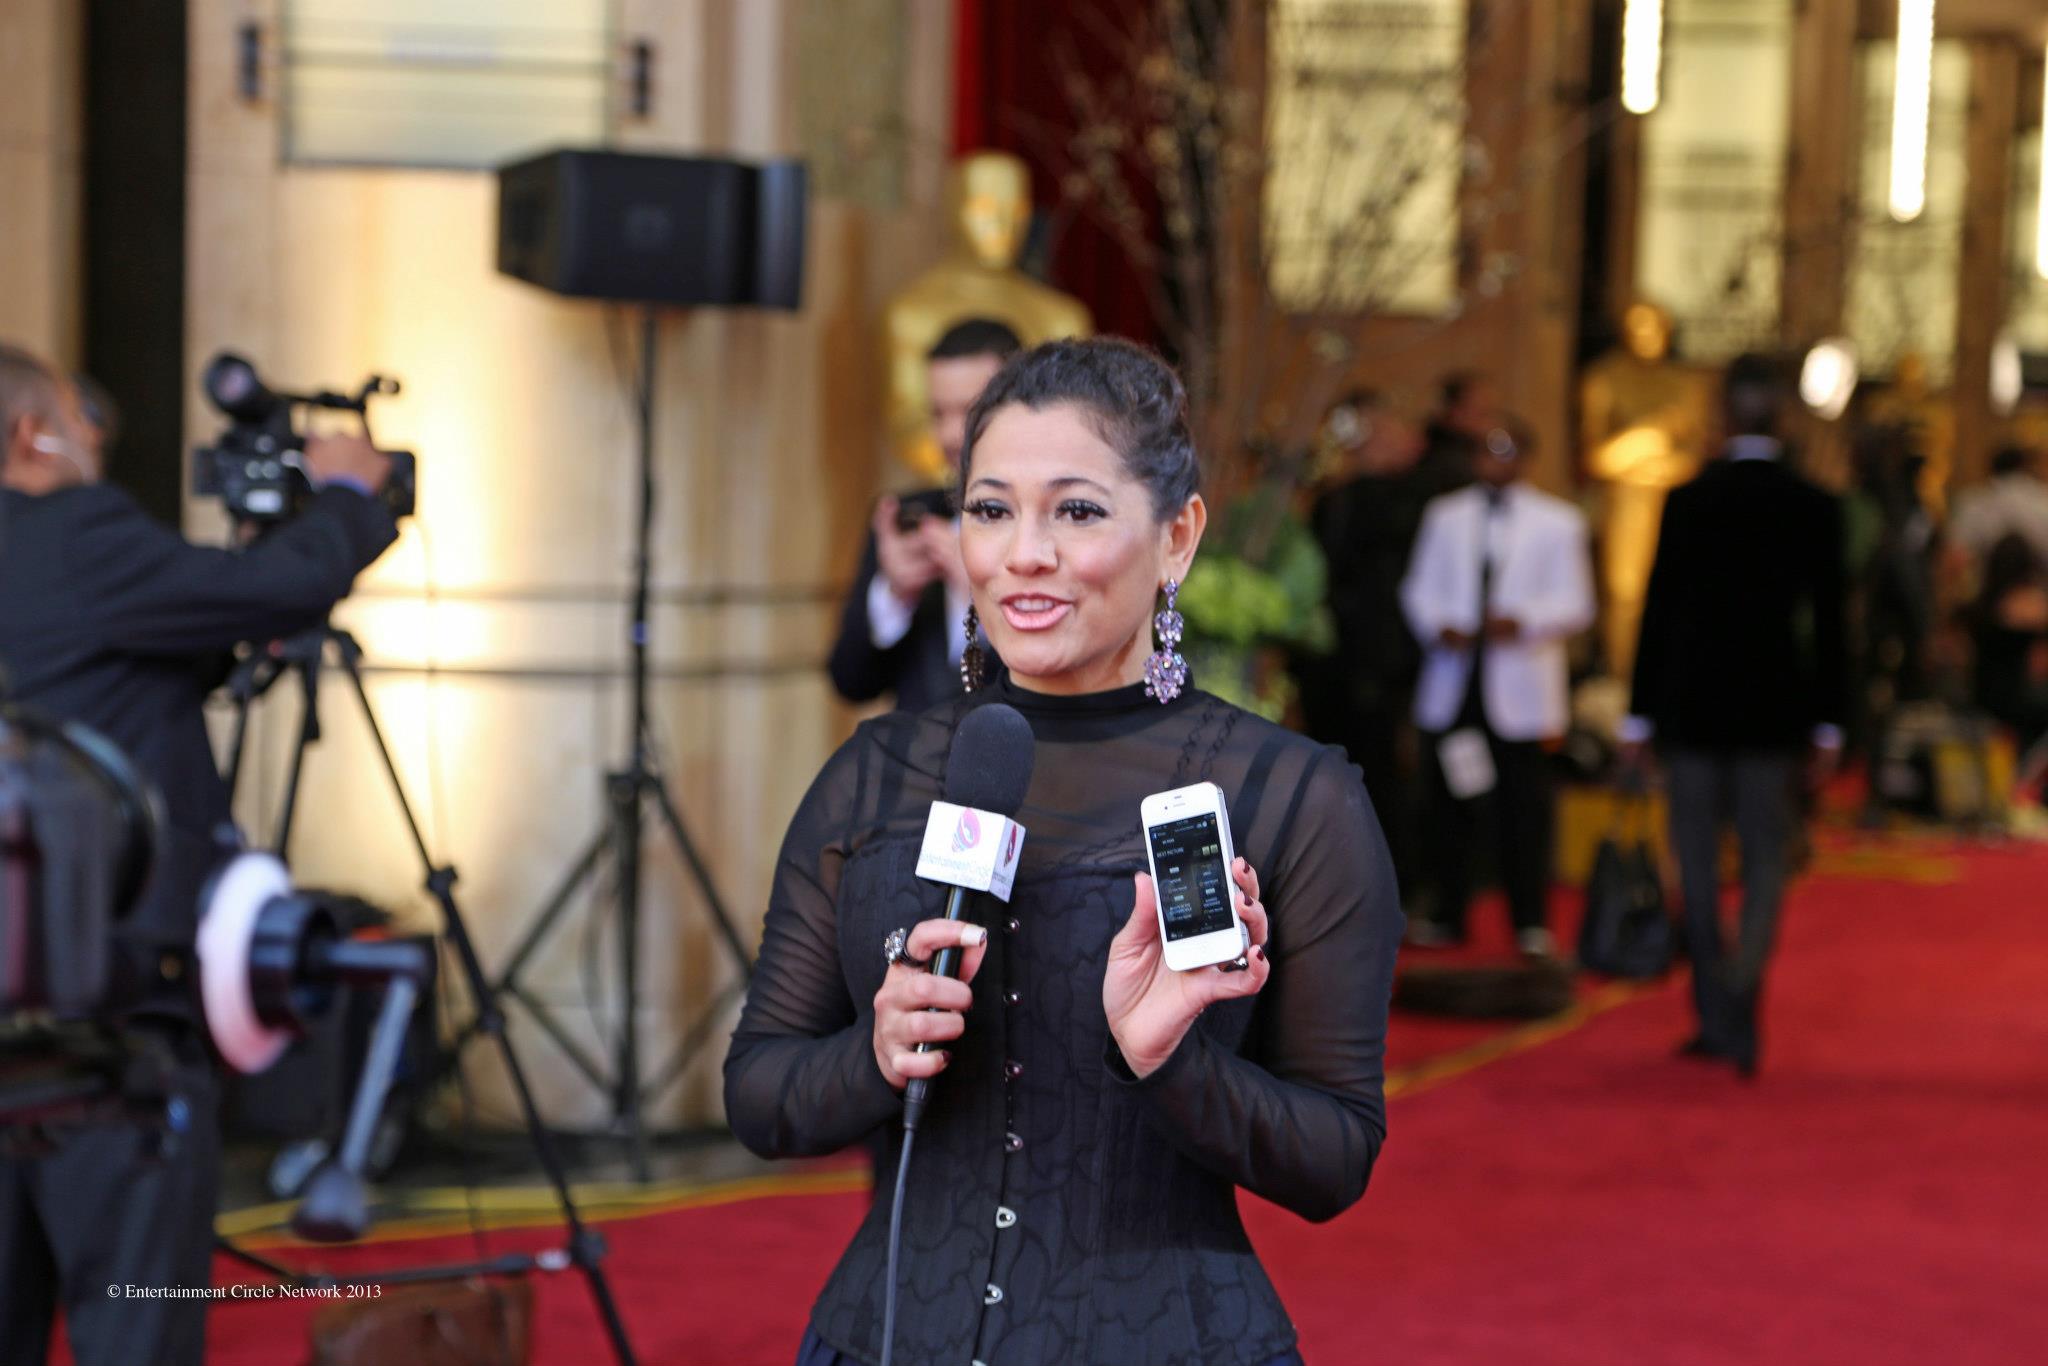 Reporting from the red carpet for Entertainment Circle on Oscar day of the 85th Academy Awards.